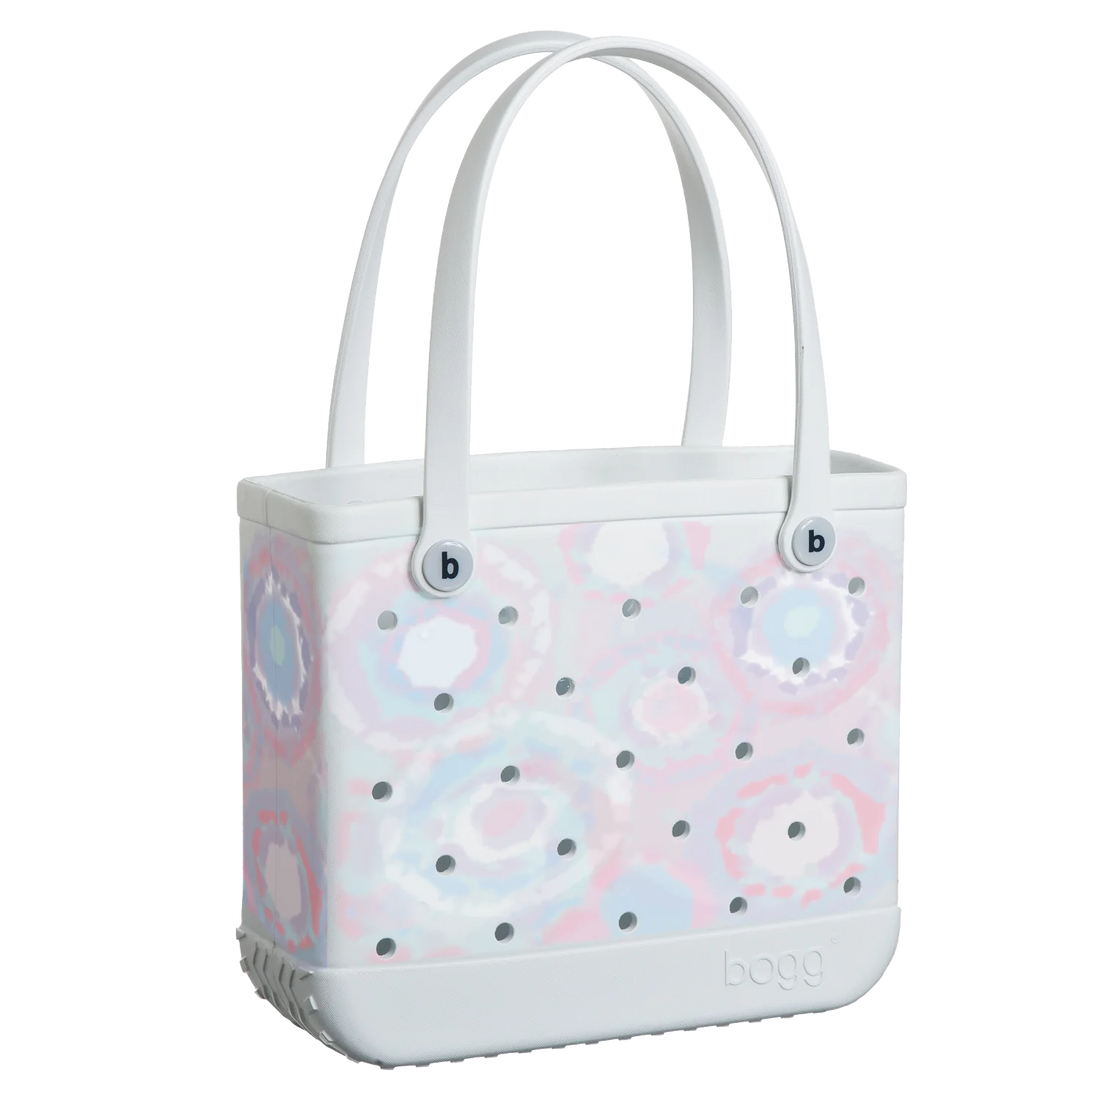 Limited Edition Baby Bogg Bag